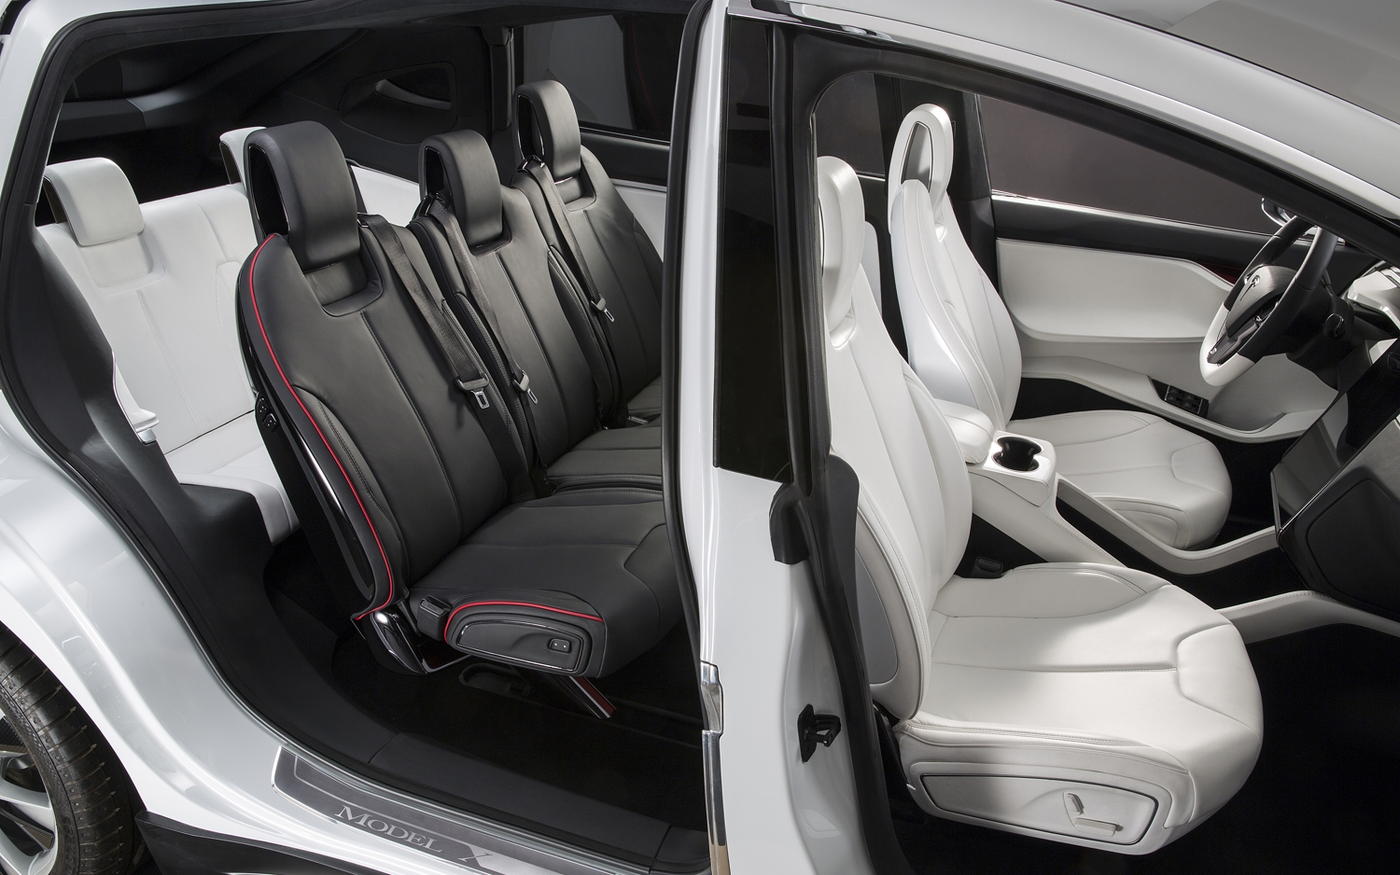 The Benefits Of Adding Protective Seat Covers To Your Tesla